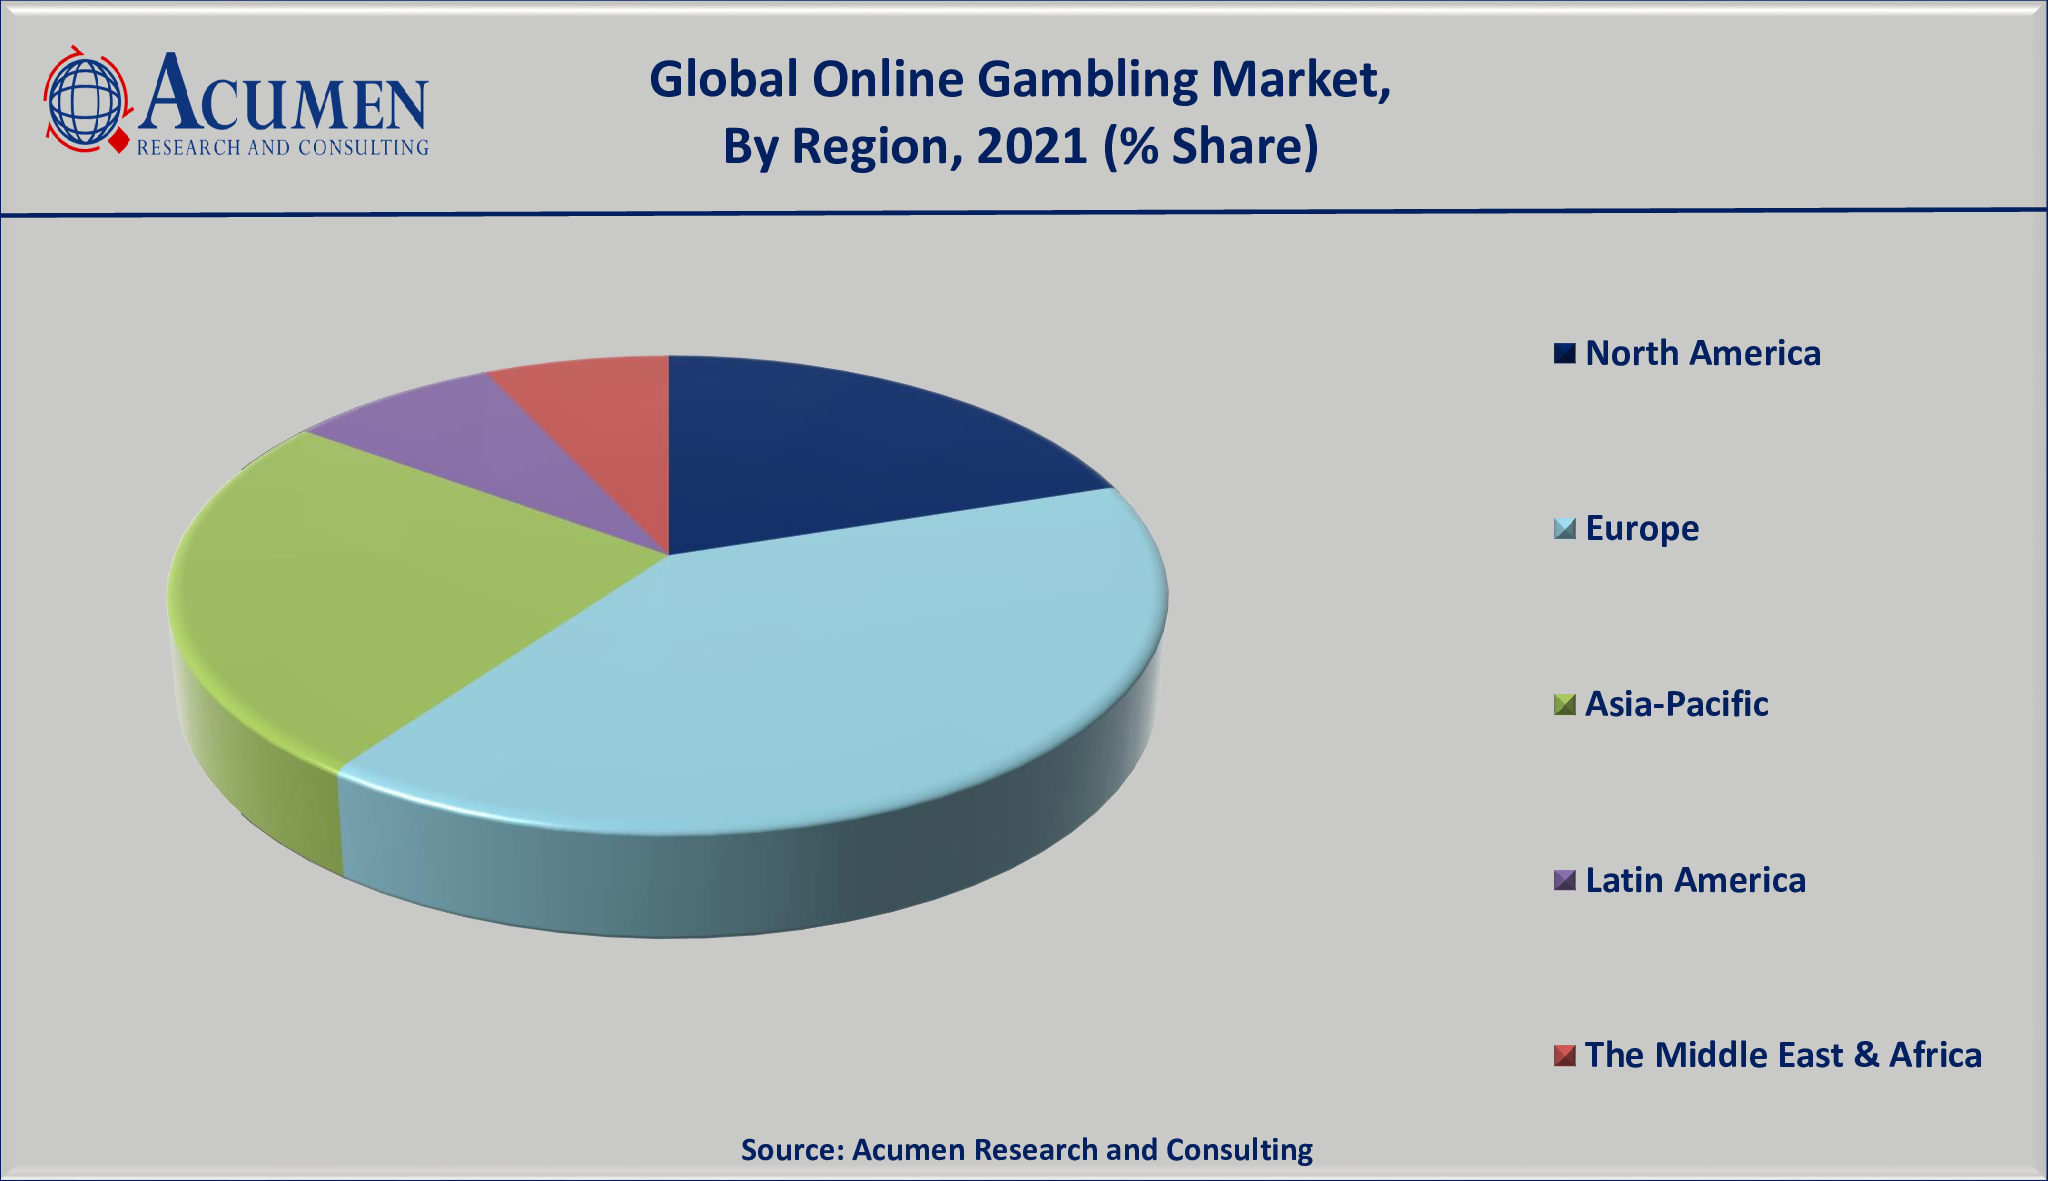 Gambling Market Analysis accounted for USD 492 billion in 2021 and is projected to reach a market size of USD 804 billion by 2030; growing at a CAGR of 5.7%.